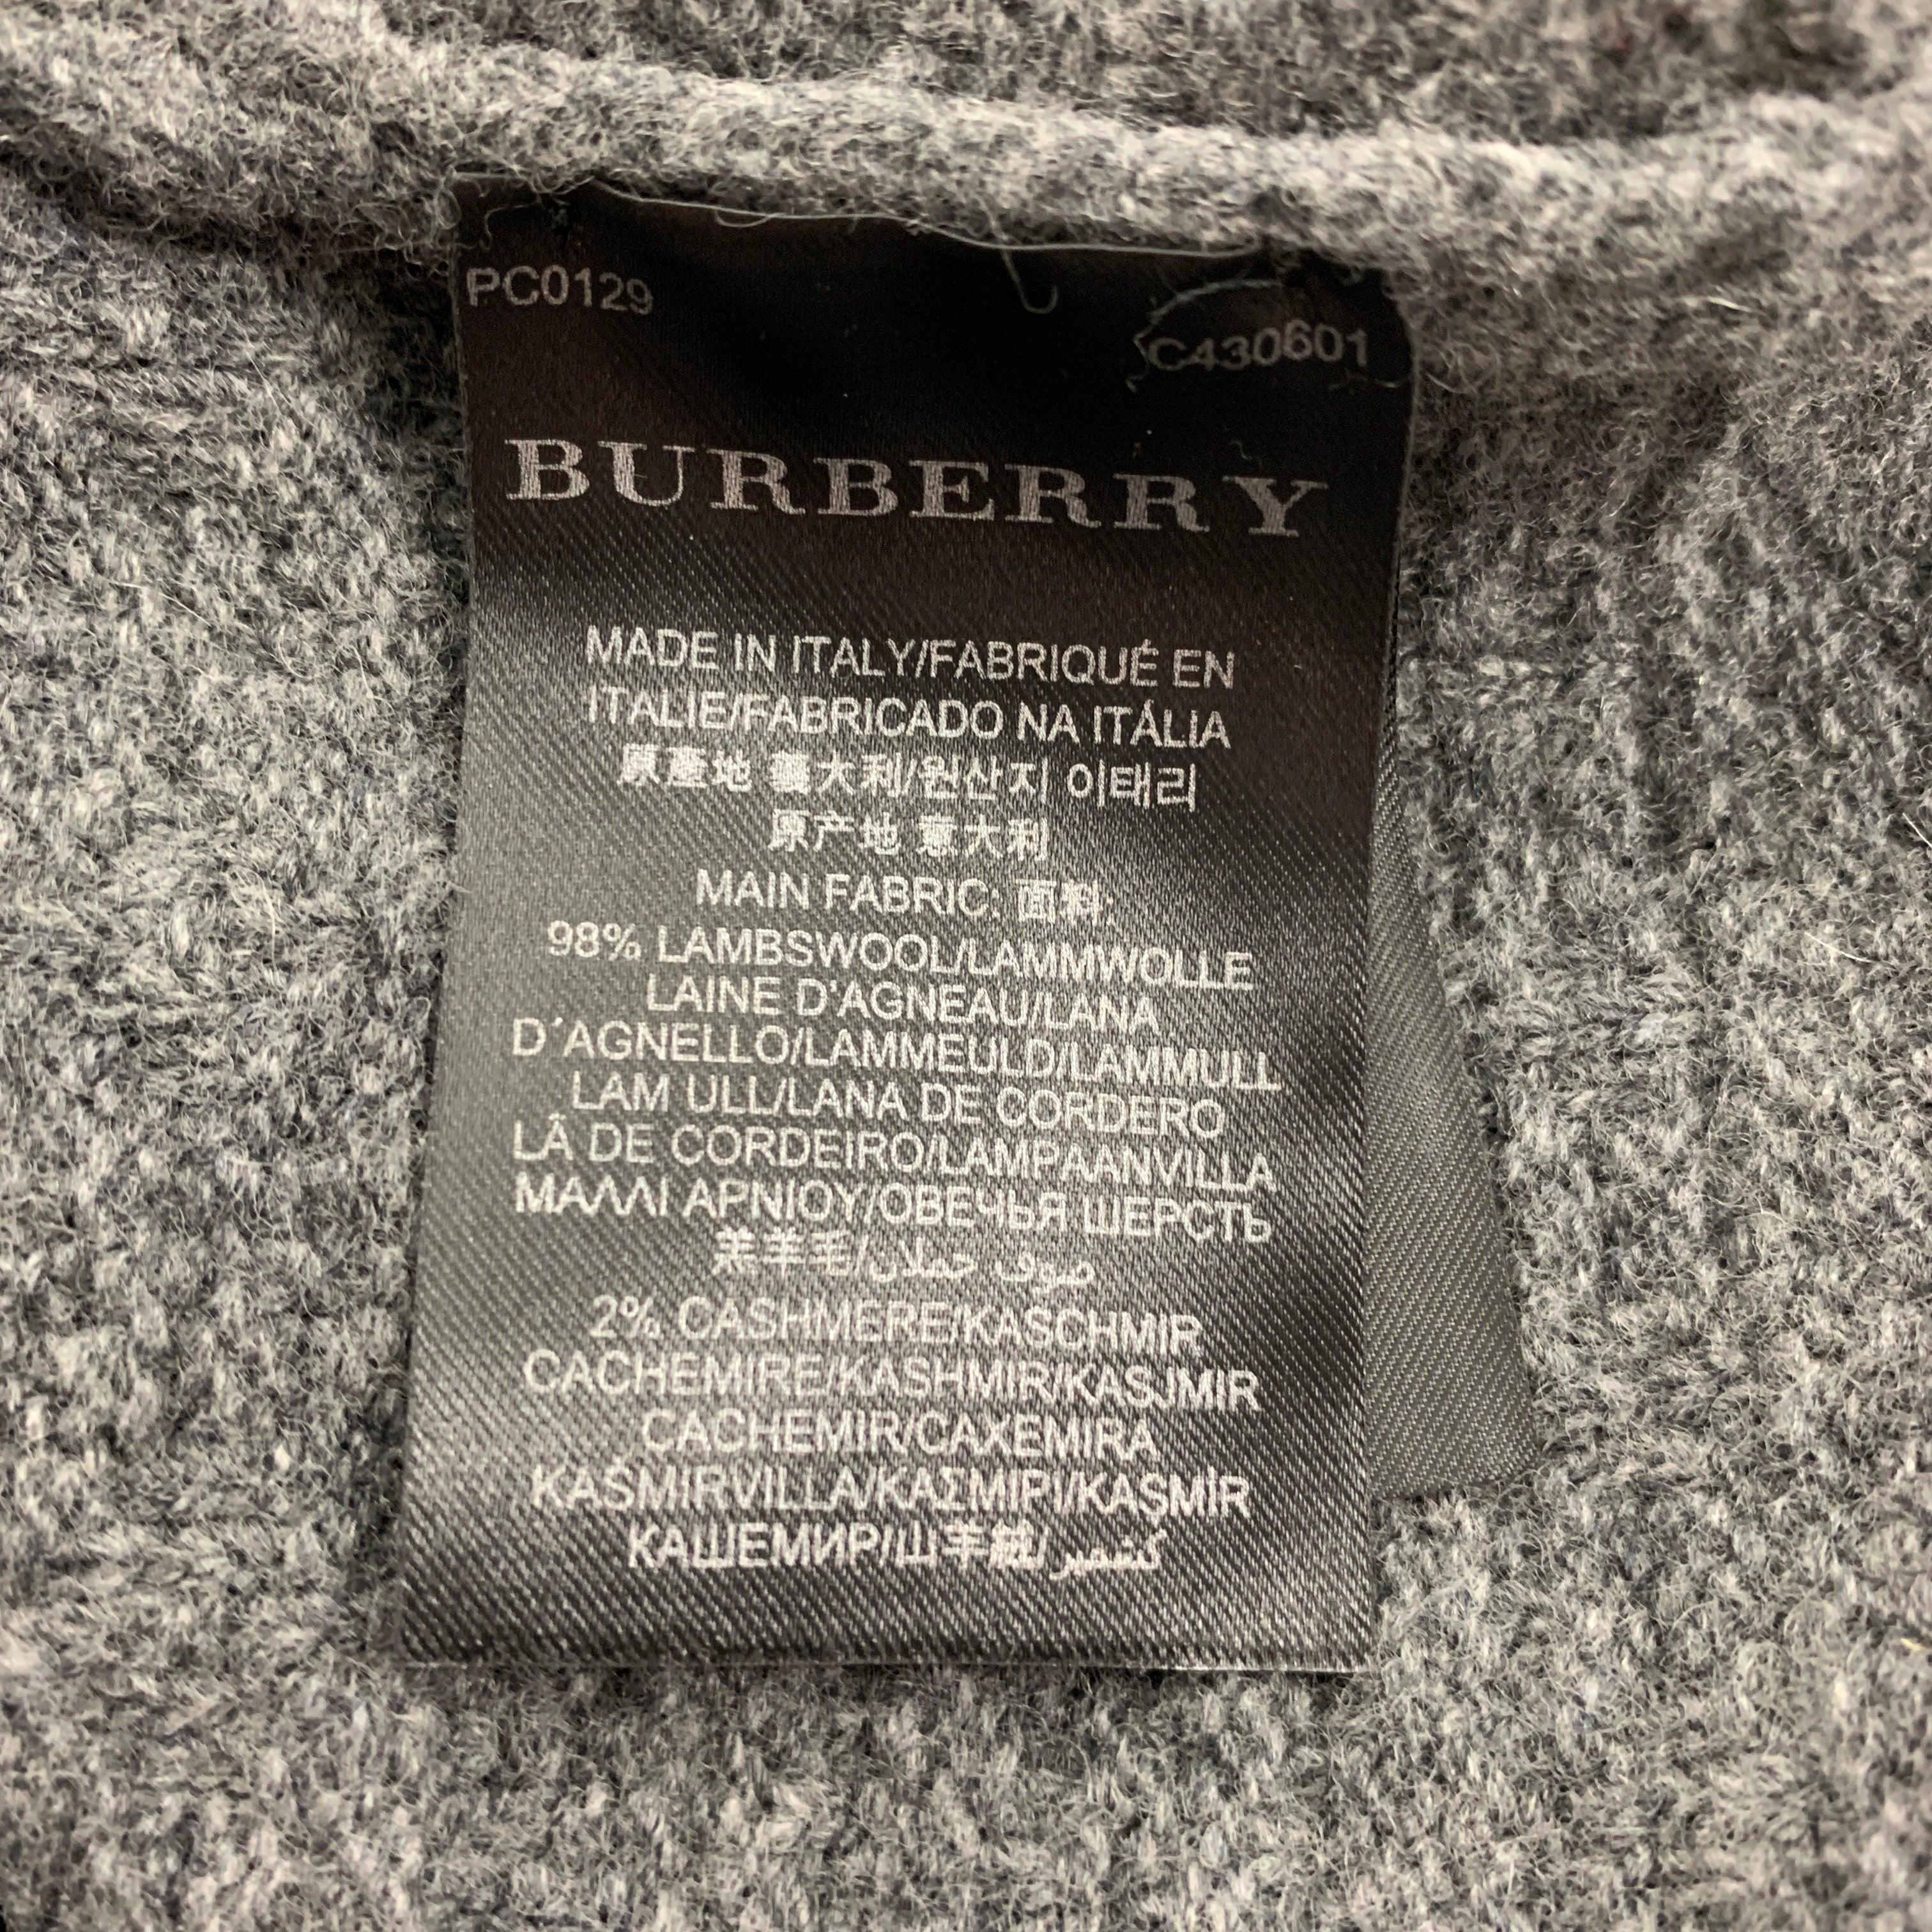 BURBERRY PRORSUM by Christopher Bailey Fairisle Lambswool / Cashmere Sweater 2